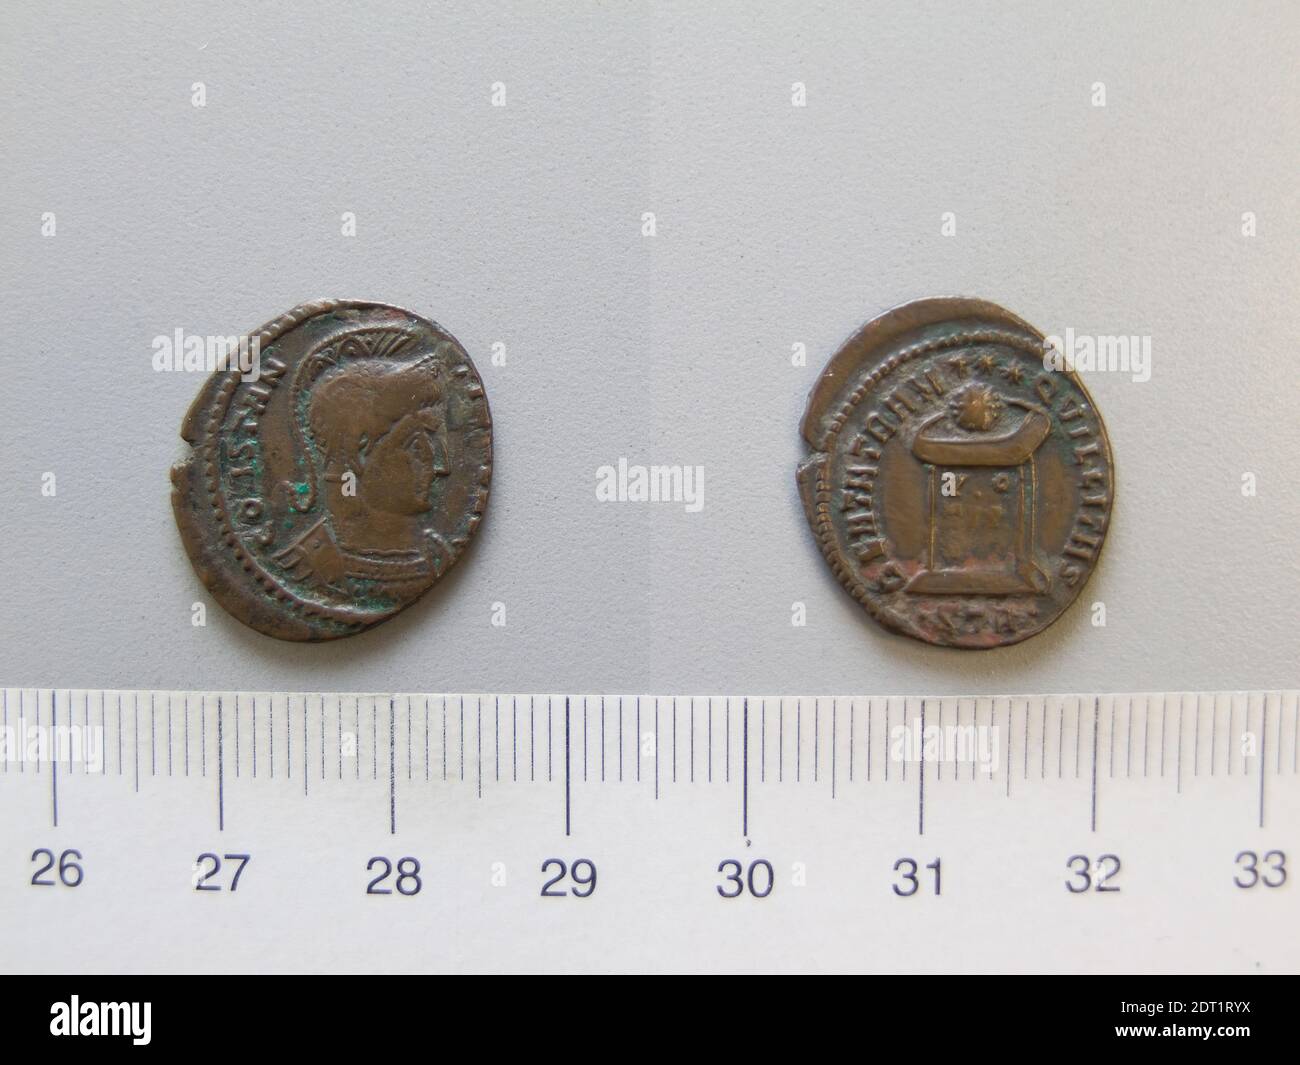 Ruler: Constantine I, Emperor of Rome, A.D. 285–337, ruled A.D. 306–337, Mint: Trier, 1 Nummus of Constantine I, Emperor of Rome from Trier, 321–24, Argentiferous bronze, 2.57 g, 6:00, 19.9 mm, Made in Trier, Gallia Belgica, Roman, 4th century, Numismatics Stock Photo